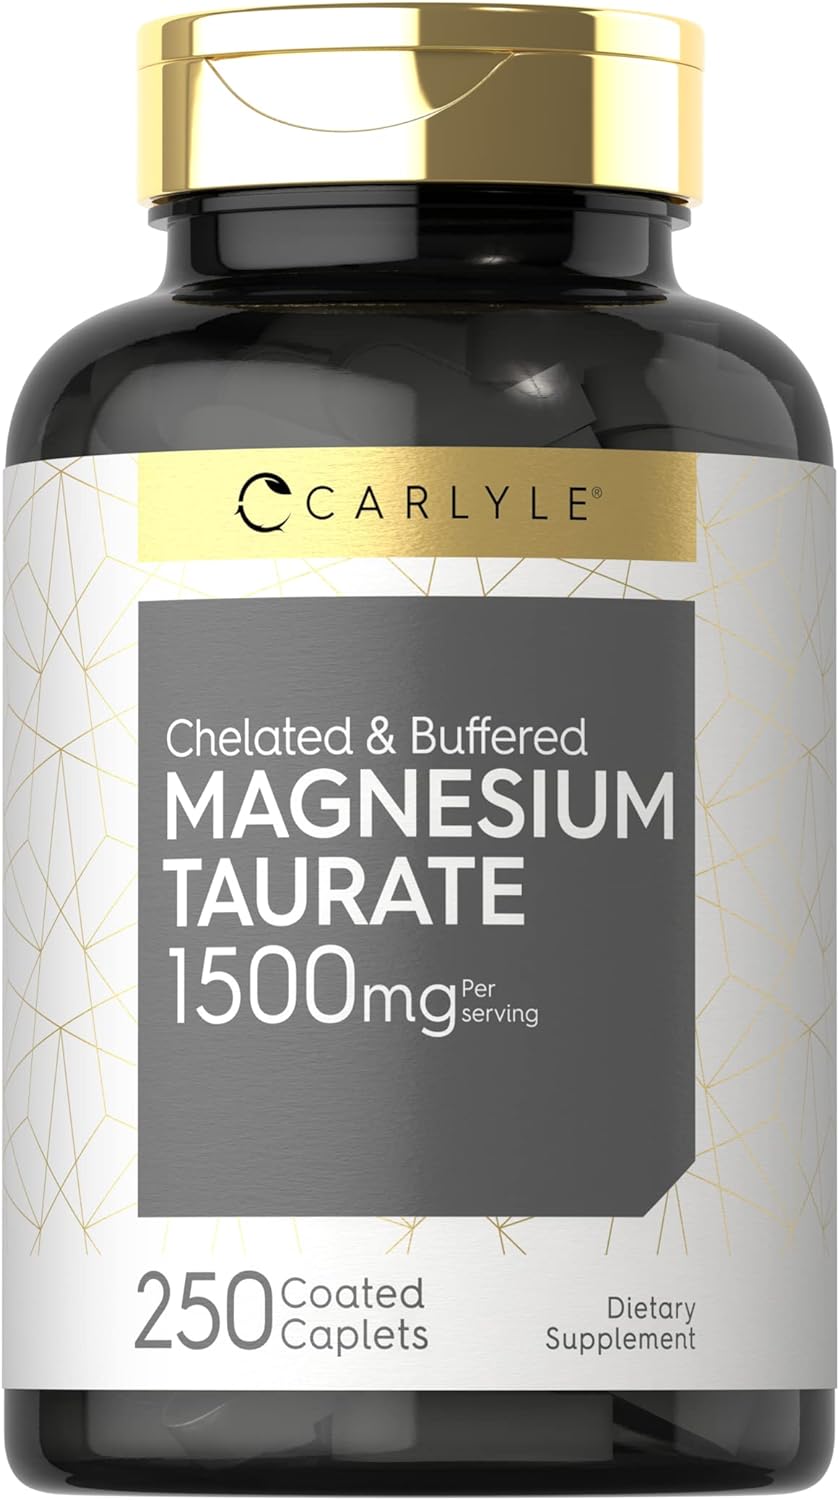 Magnesium Taurate 1500mg | 250 Caplets | Chelated and Buffered | Vegetarian, Non-GMO, Gluten Free Supplement | by Carlyl